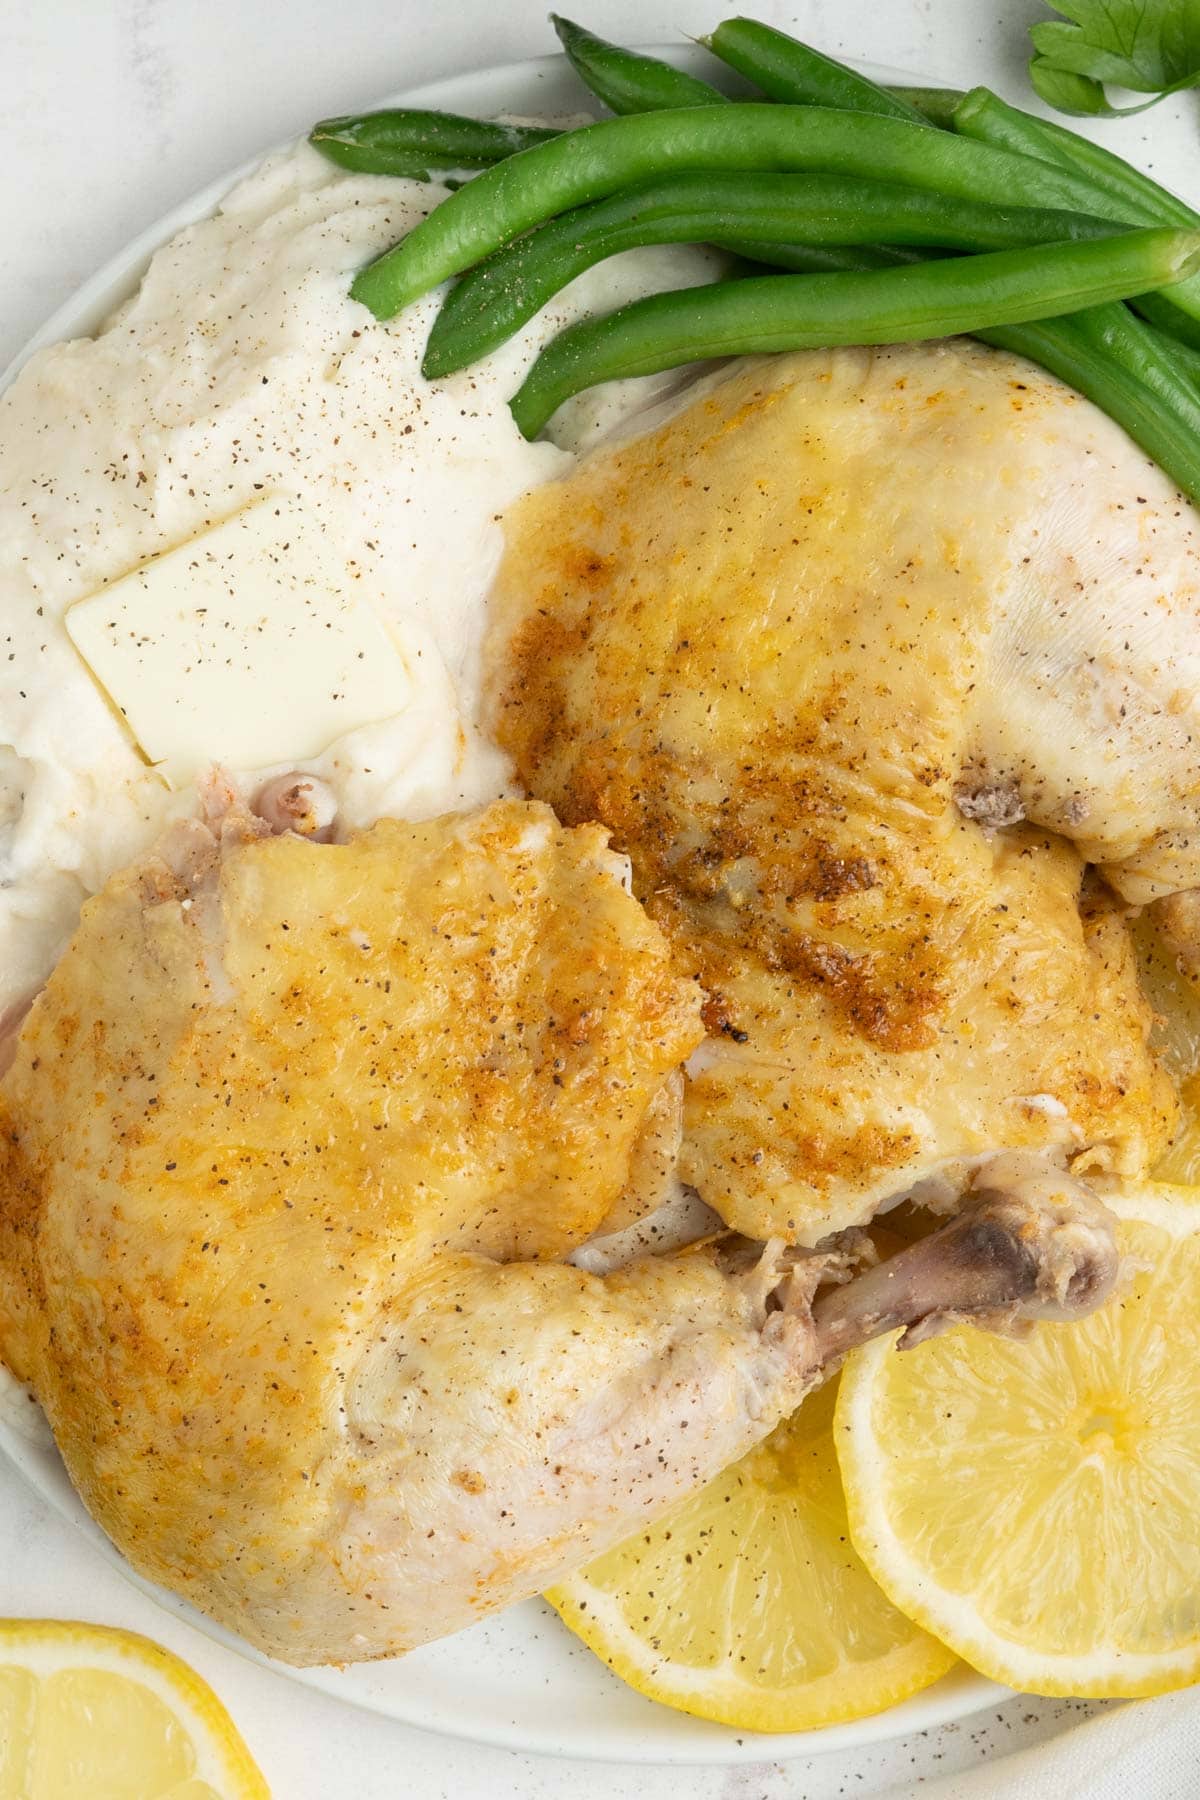 chicken pieces with mashed potatoes and green beans.